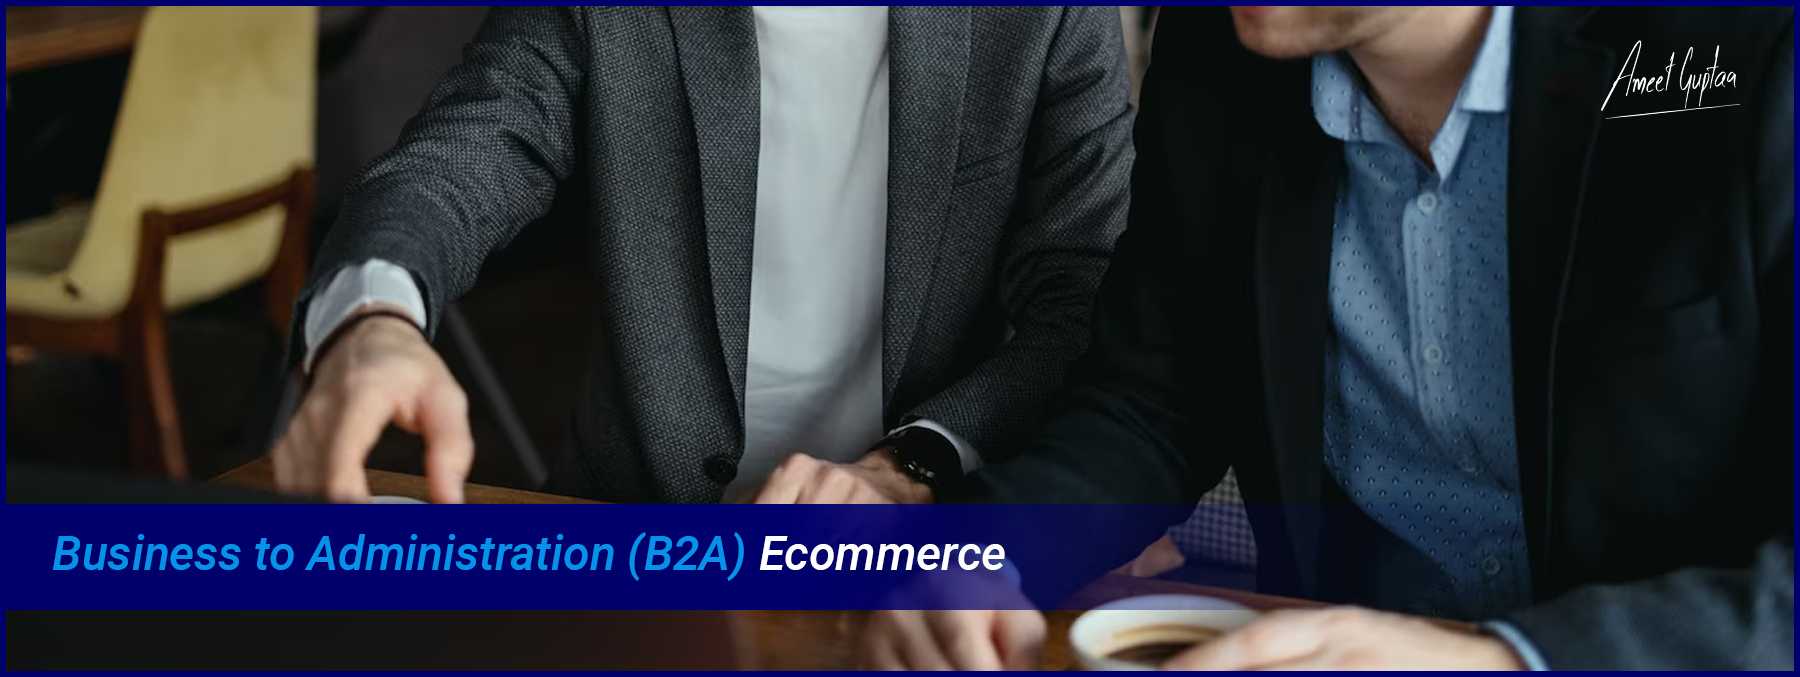 Business-to-Administration-B2A-Ecommerce-Webvizion-Global